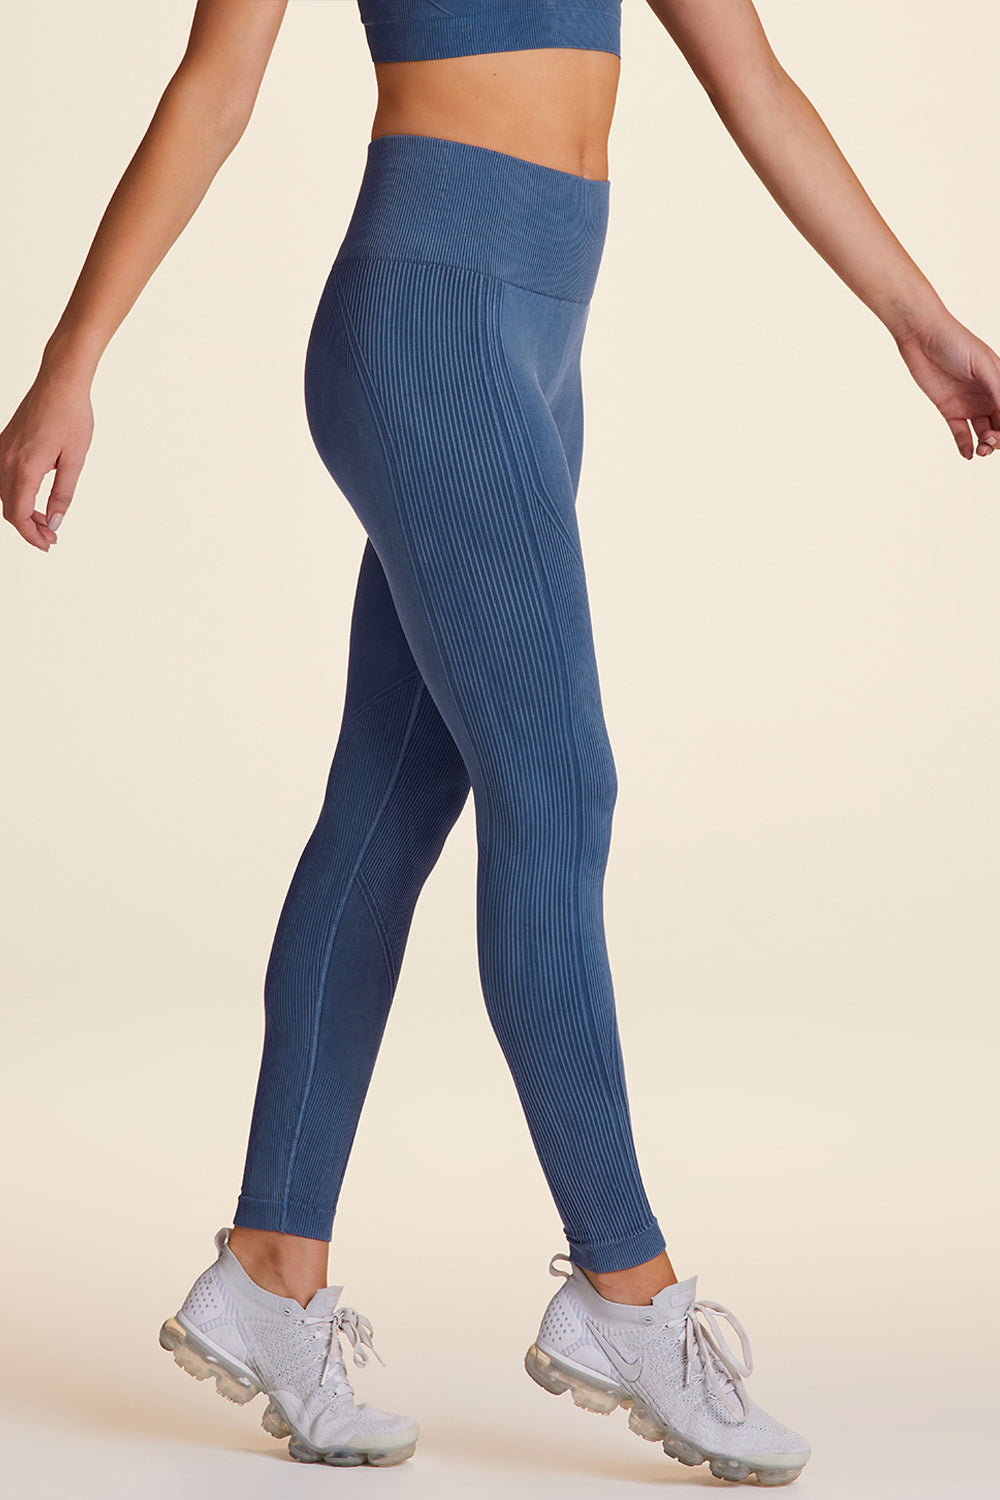 Side view of Alala Women's Luxury Athleisure flow seamless tight in blue with rib detailing